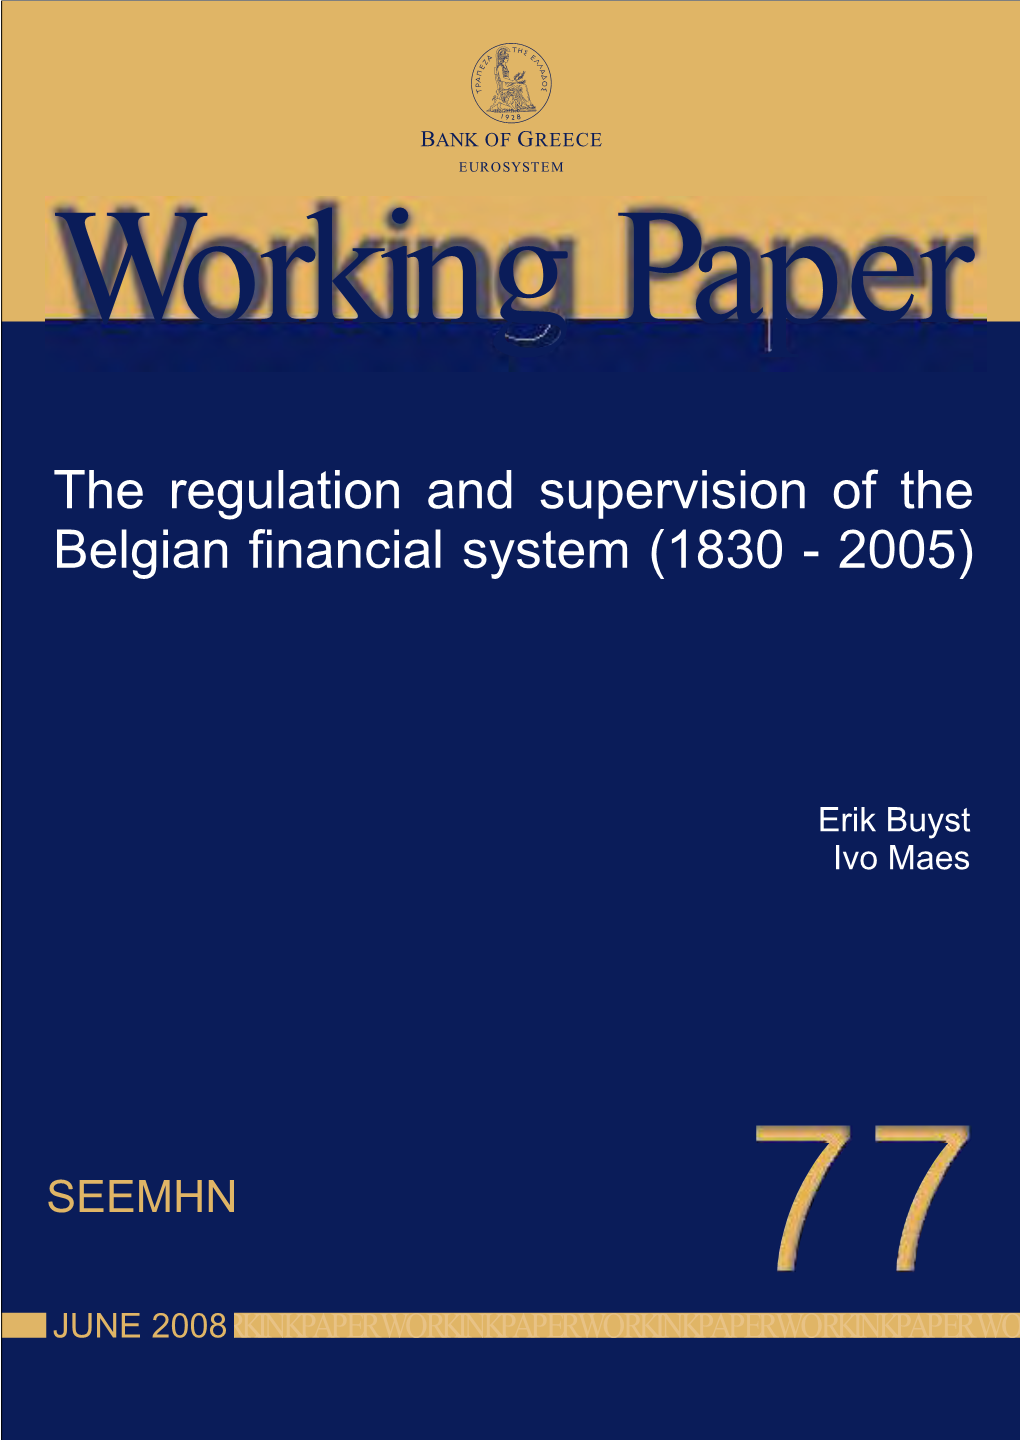 The Regulation and Supervision of the Belgian Financial System (1830 - 2005)